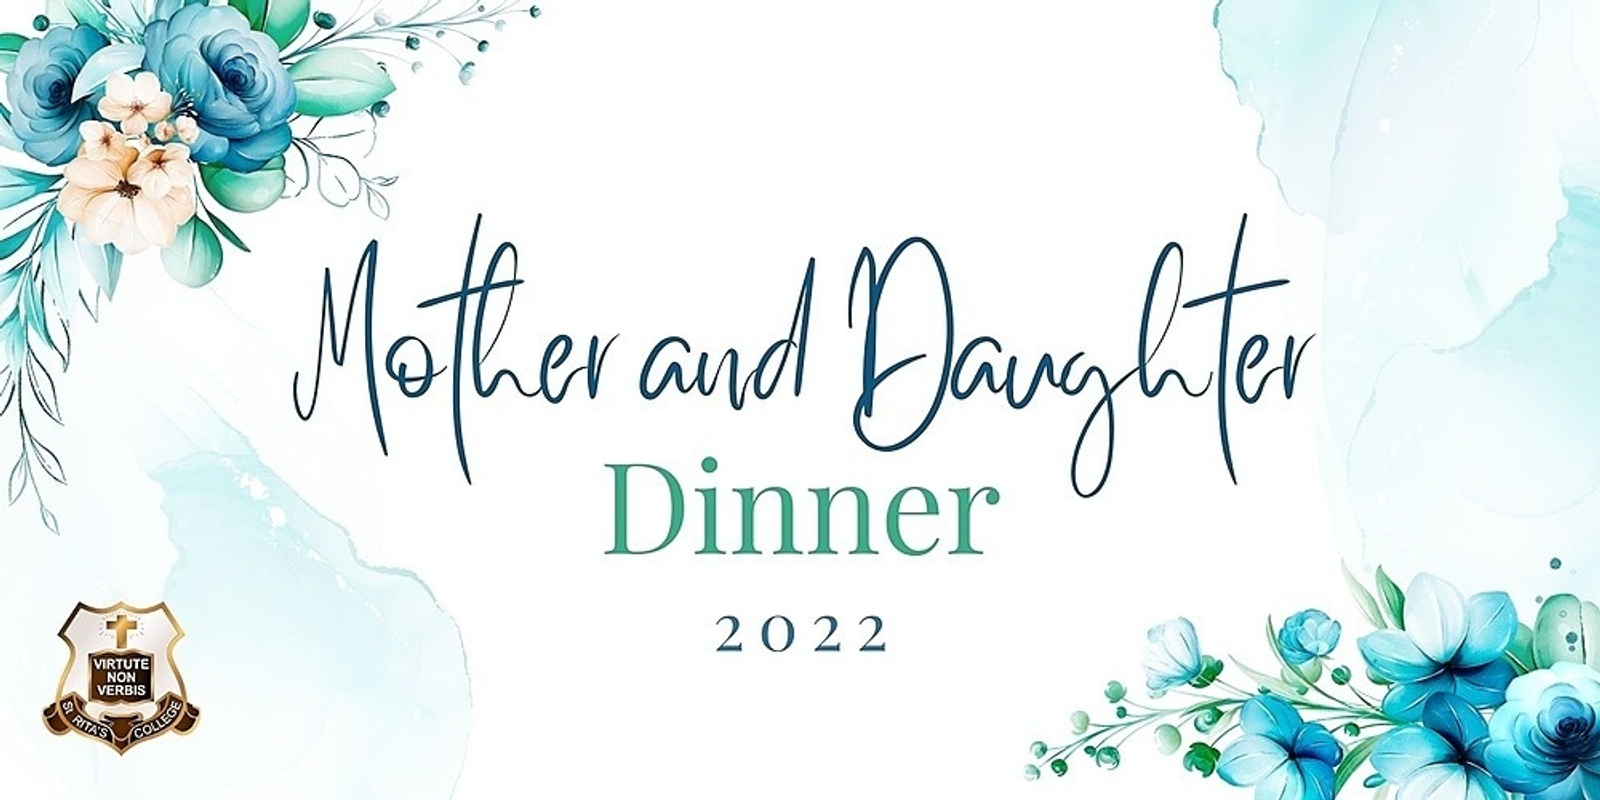 Banner image for St Rita's College Mother Daughter Dinner 2022